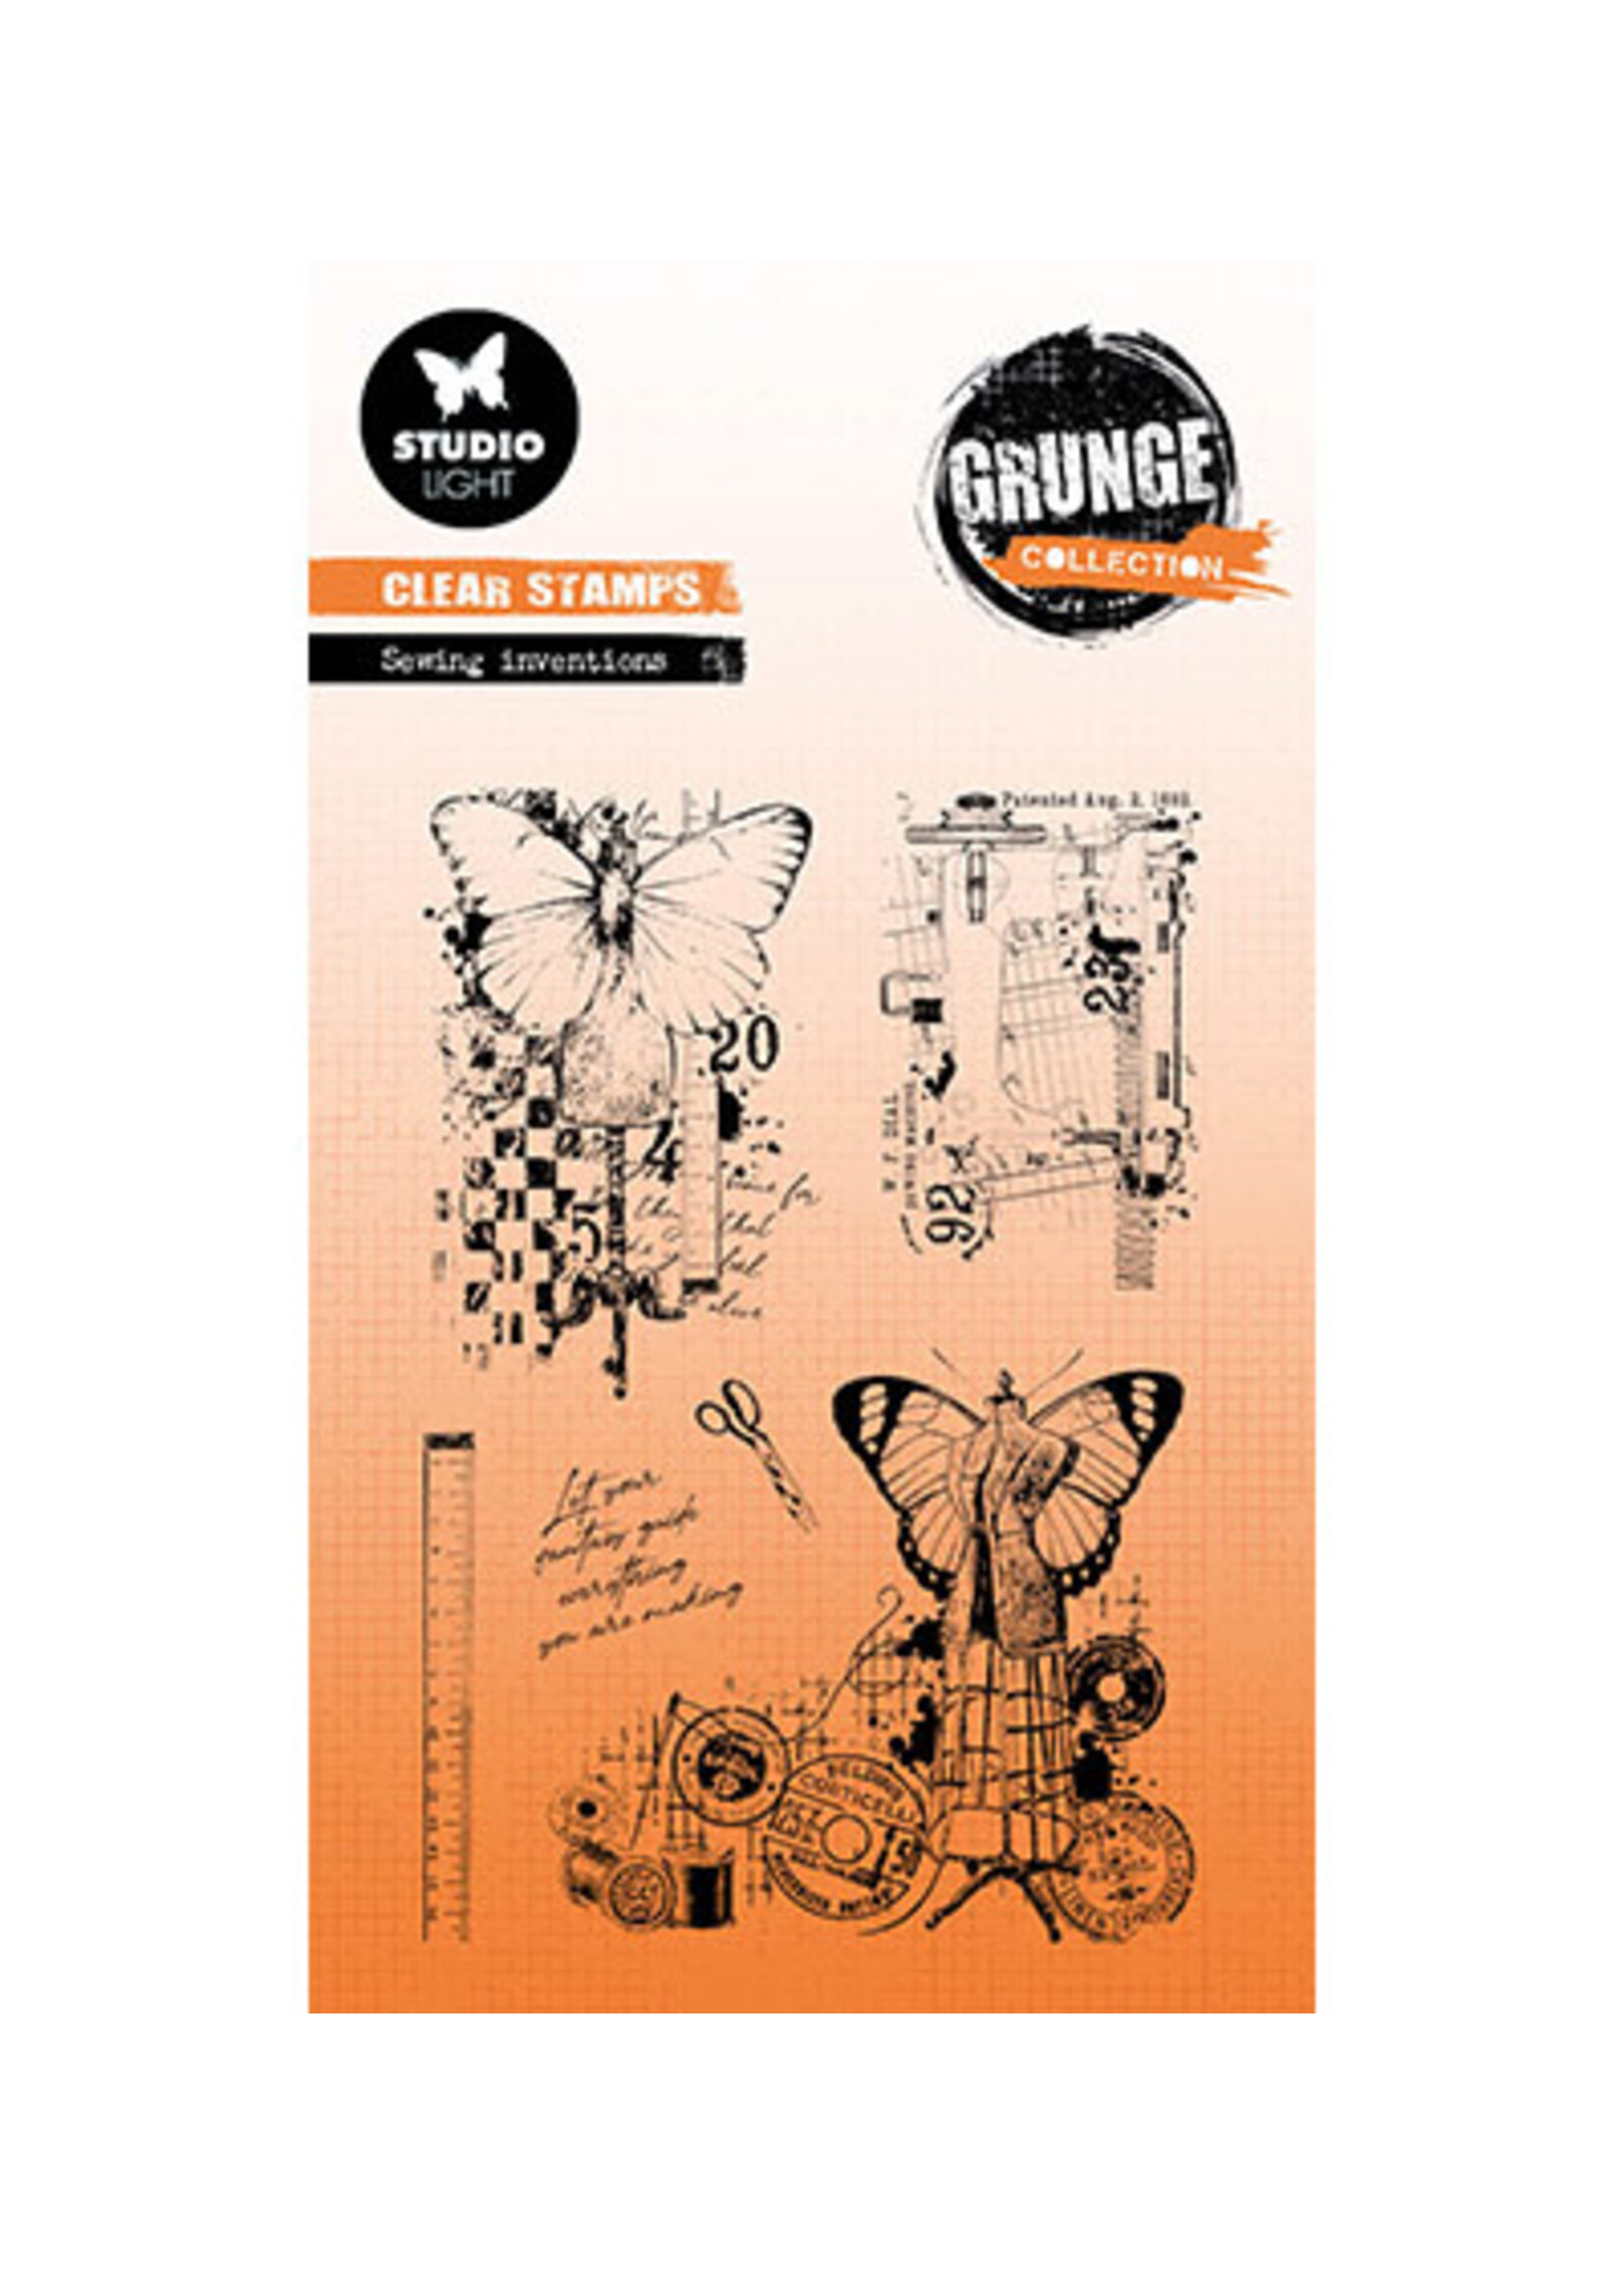 Studio Light SL-GR-STAMP516 - Sewing inventions Grunge Collection nr.516